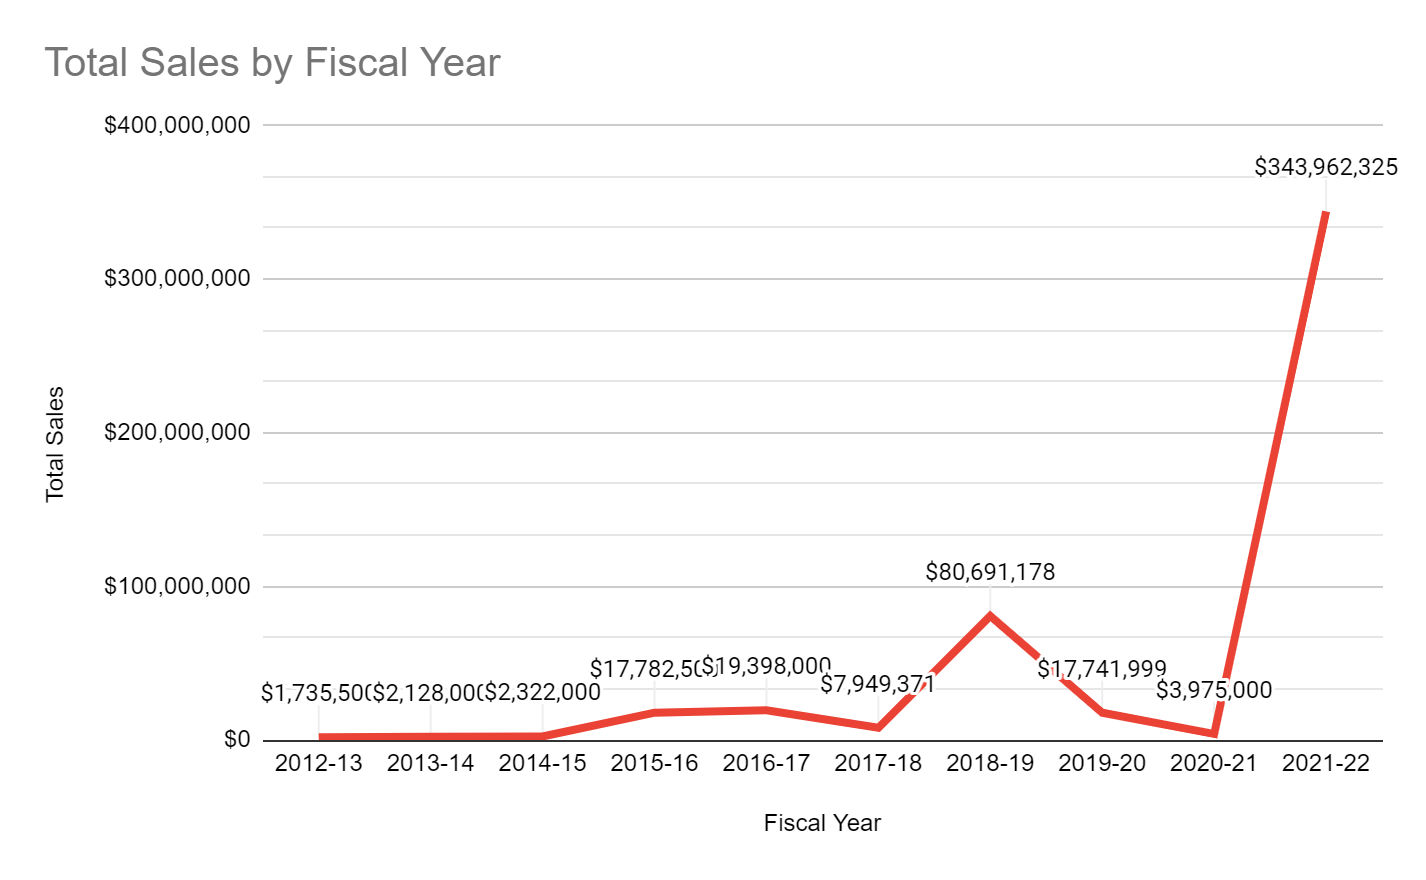 Figure 1: Total Sales by Fiscal Year (2012-2022)